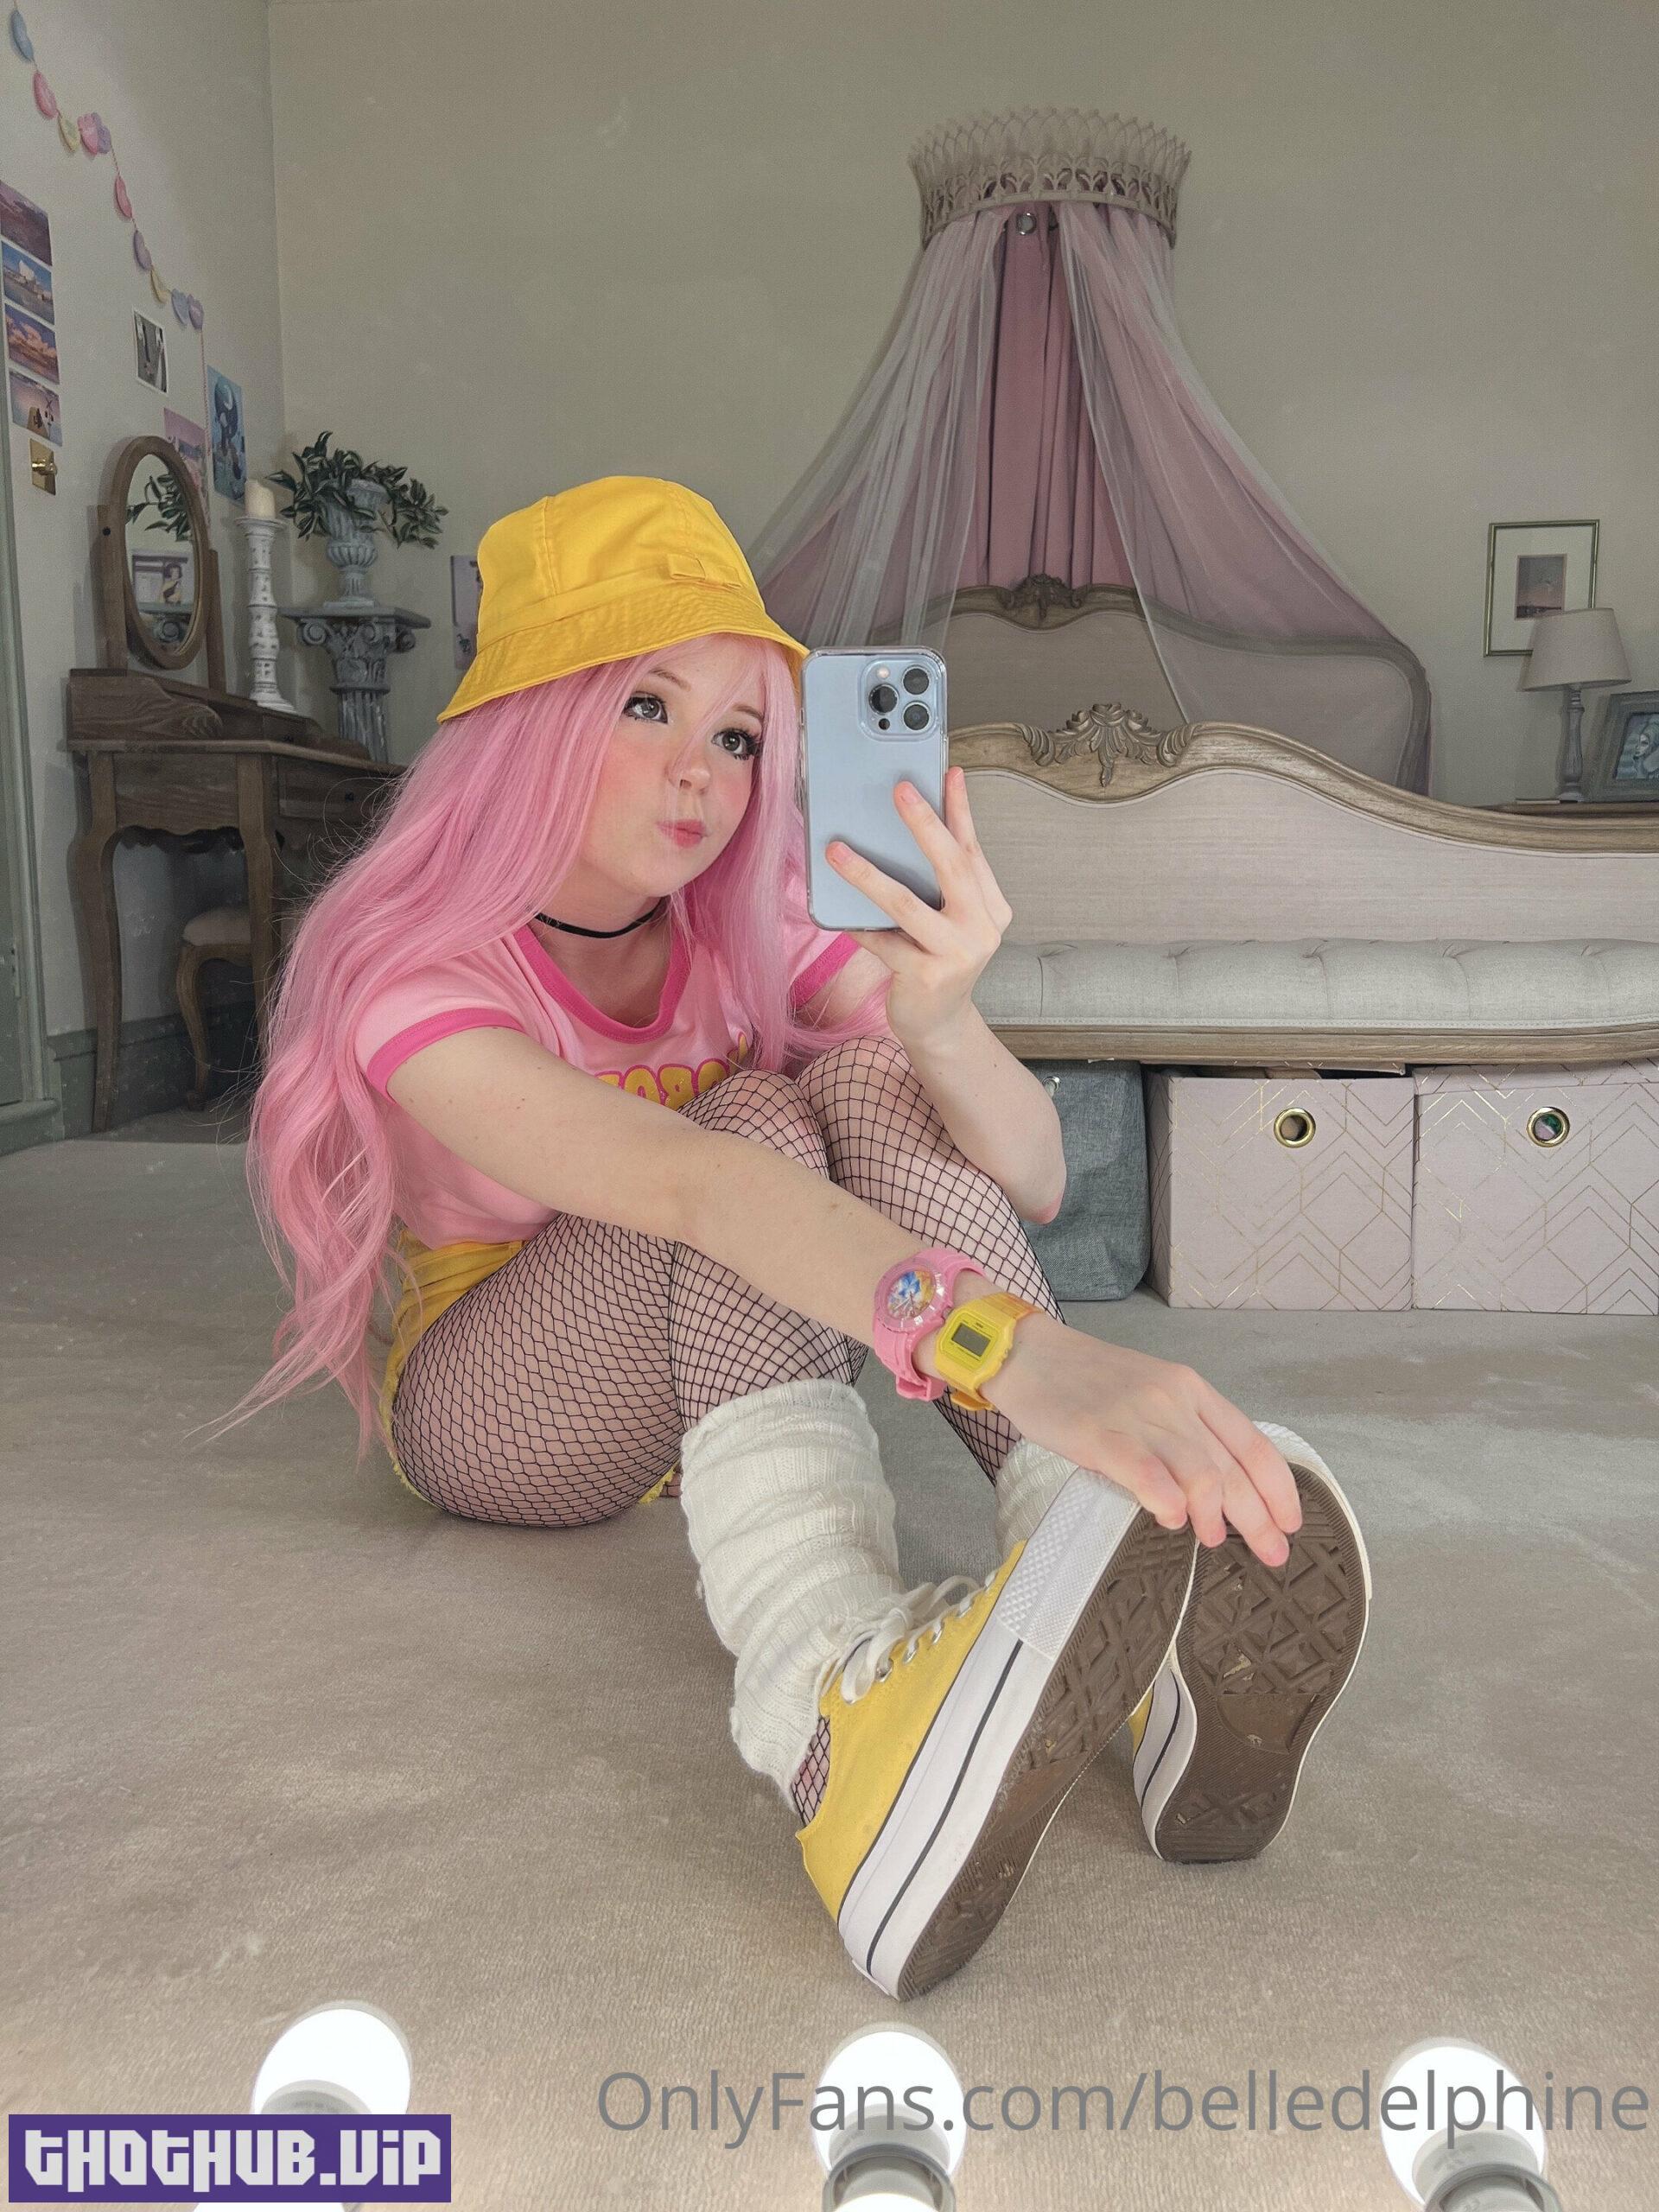 1667573016 633 Top Naked Belle Delphine Yellow Hat Nude NSFW Porn Leak